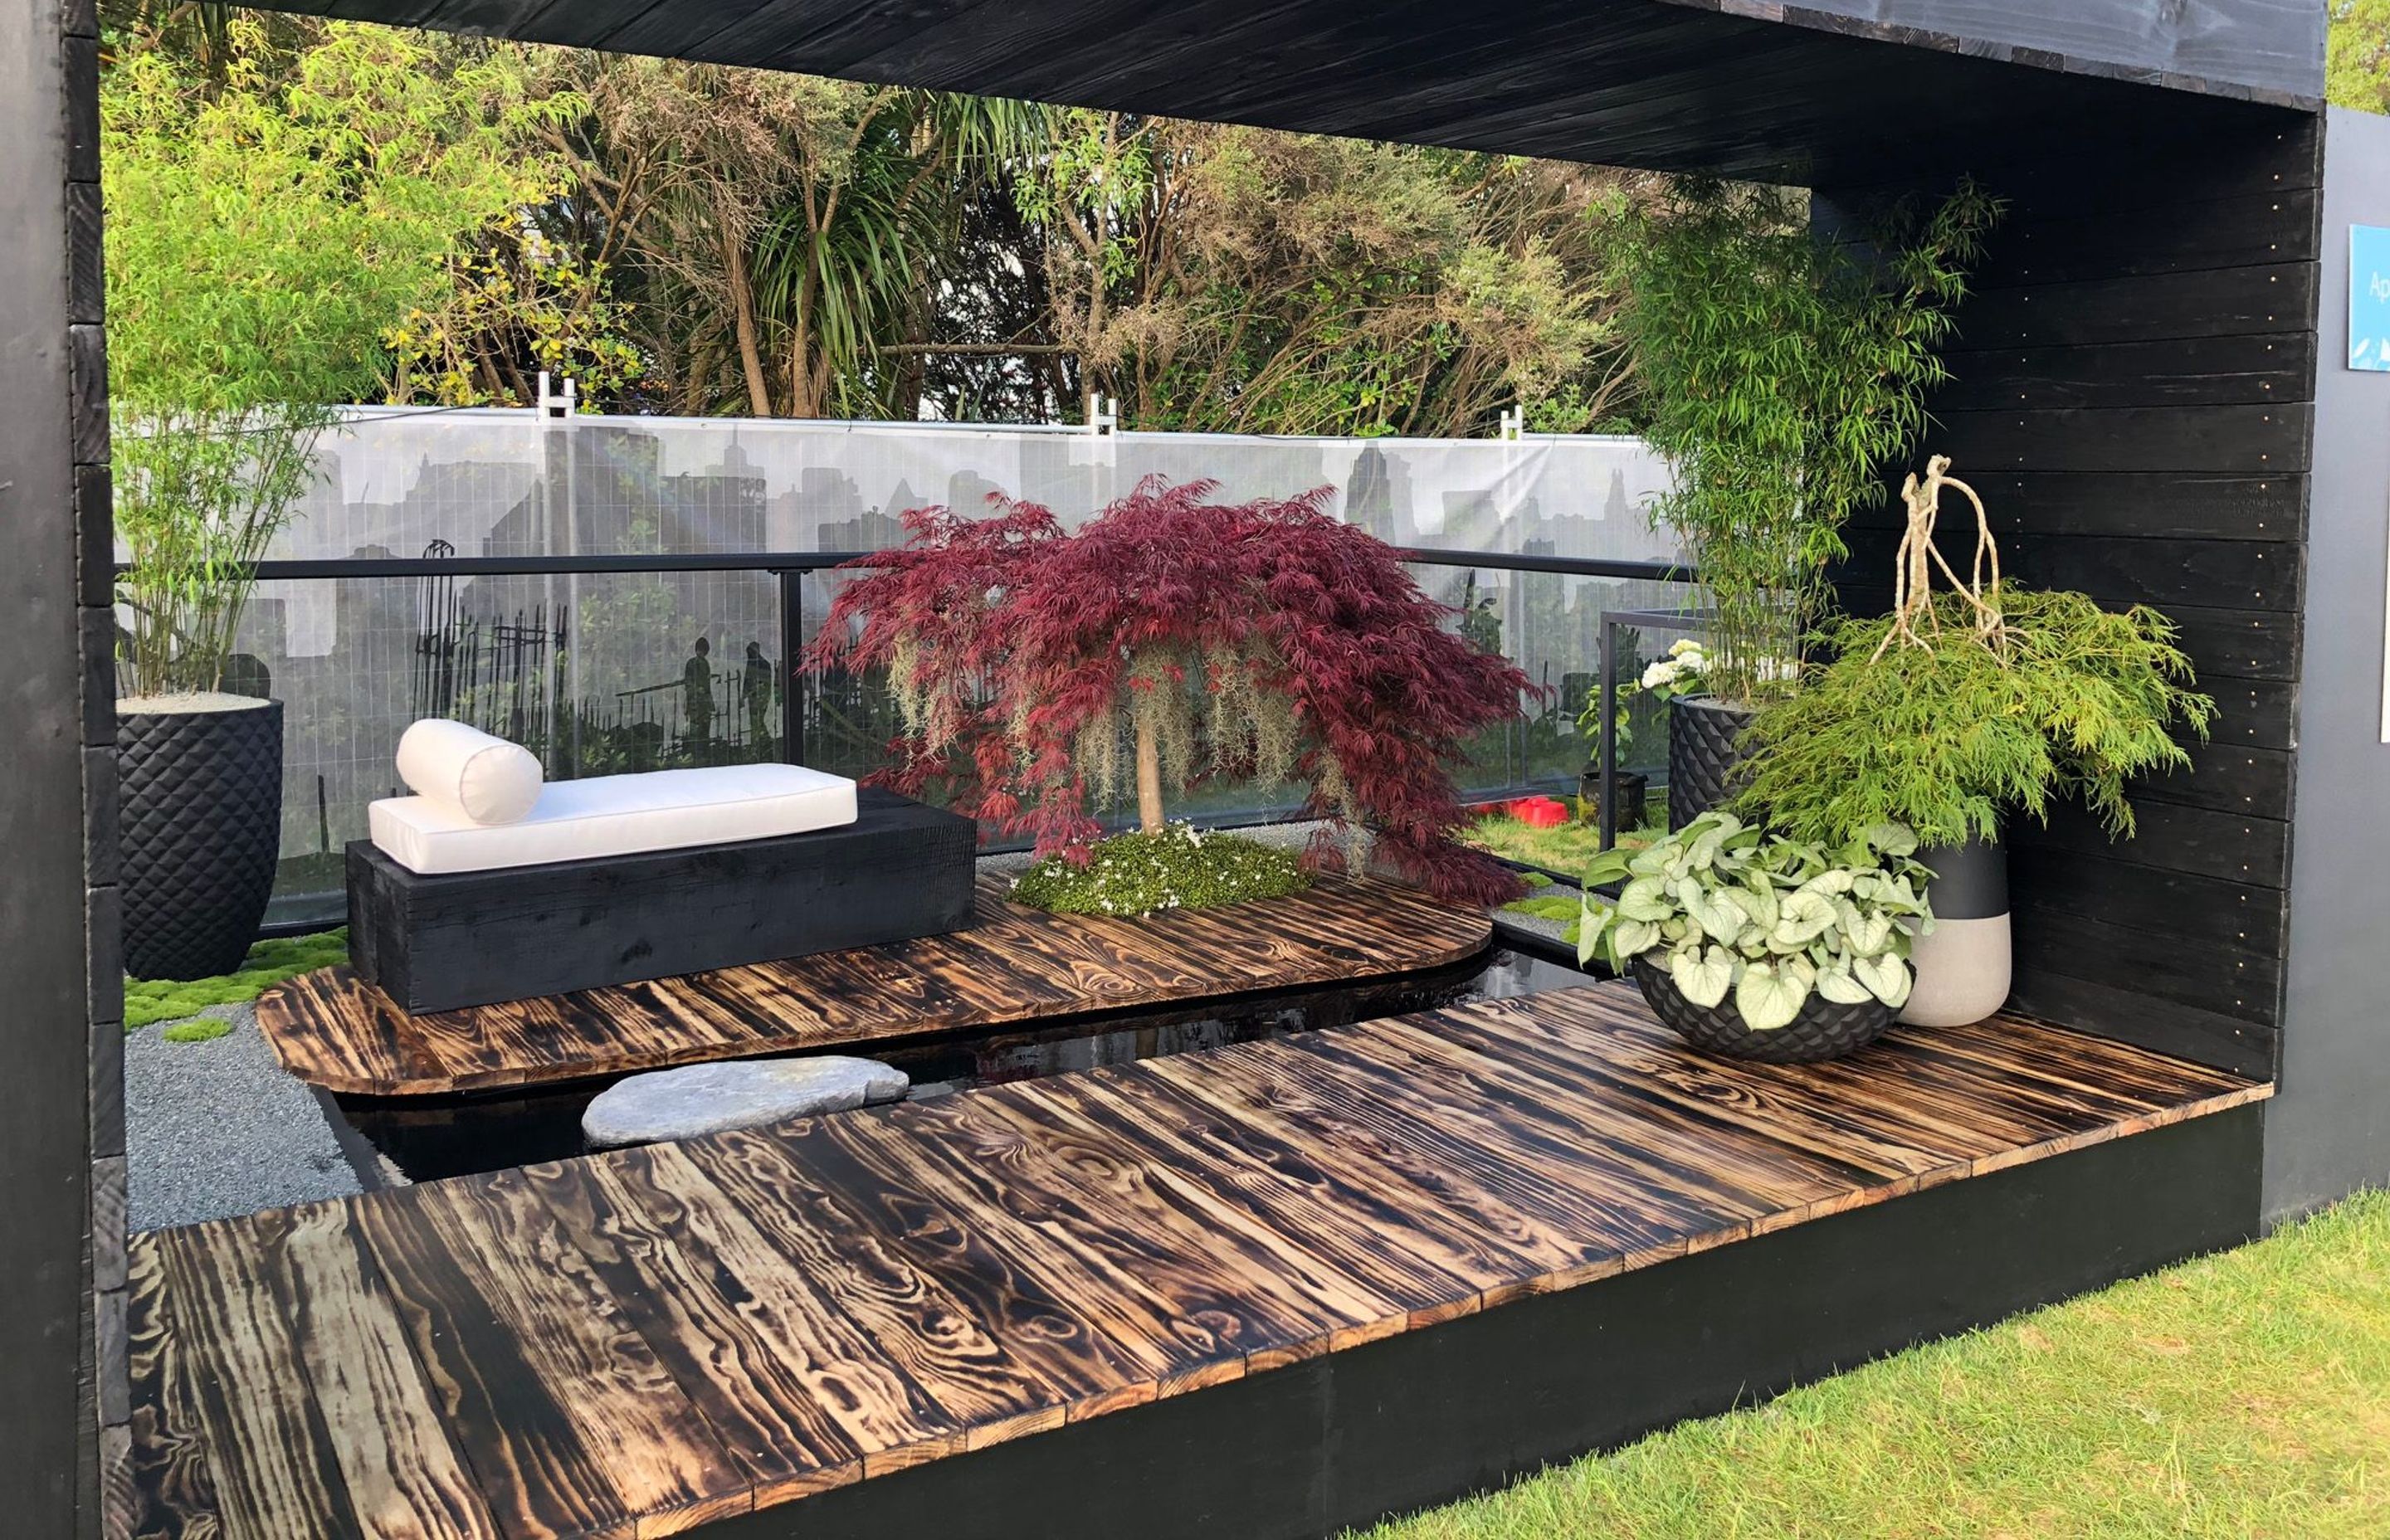 This urban oasis by Industry Landscapes has Asian-inspired elements bring a Zen-like influence to the space.. An ancient Japanese wood preservation technique is applied to multiple surfaces to create textural beauty.